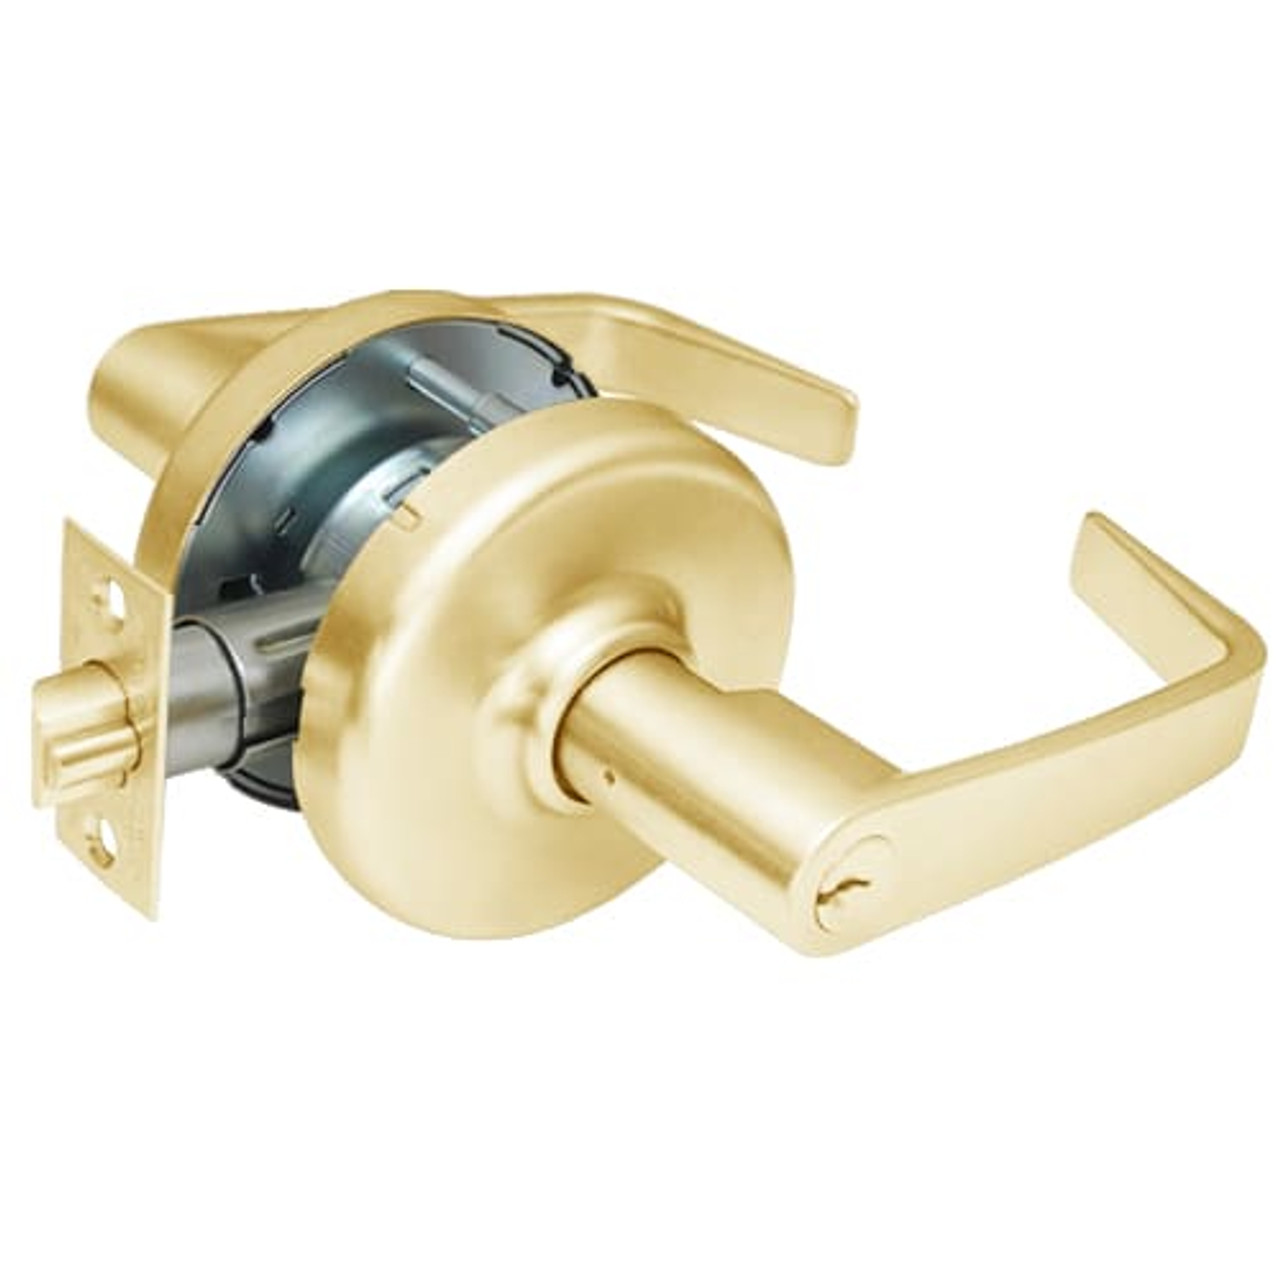 CL3555-NZD-605 Corbin CL3500 Series Heavy Duty Classroom Cylindrical Locksets with Newport Lever in Bright Brass Finish